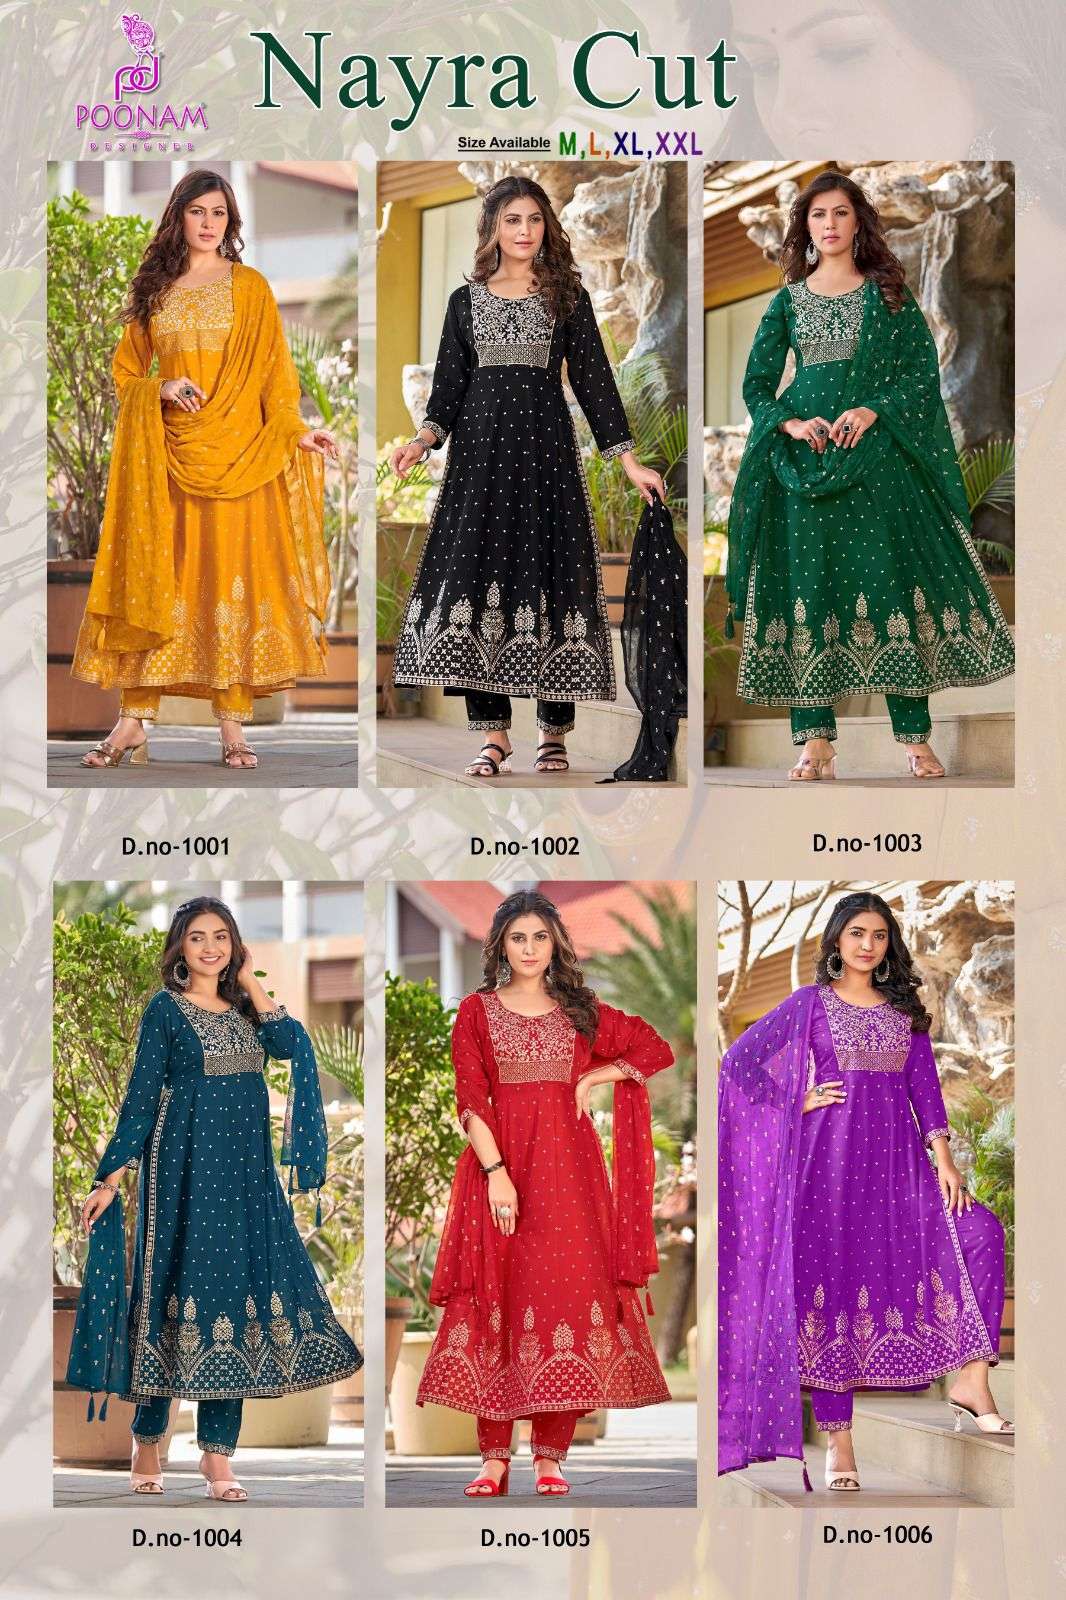 POONAM DESIGNER PRESENTS NAYRA CUT PURE RAYON WITH EMBROIDERY WHOLESALE READYMADE COLLECTION